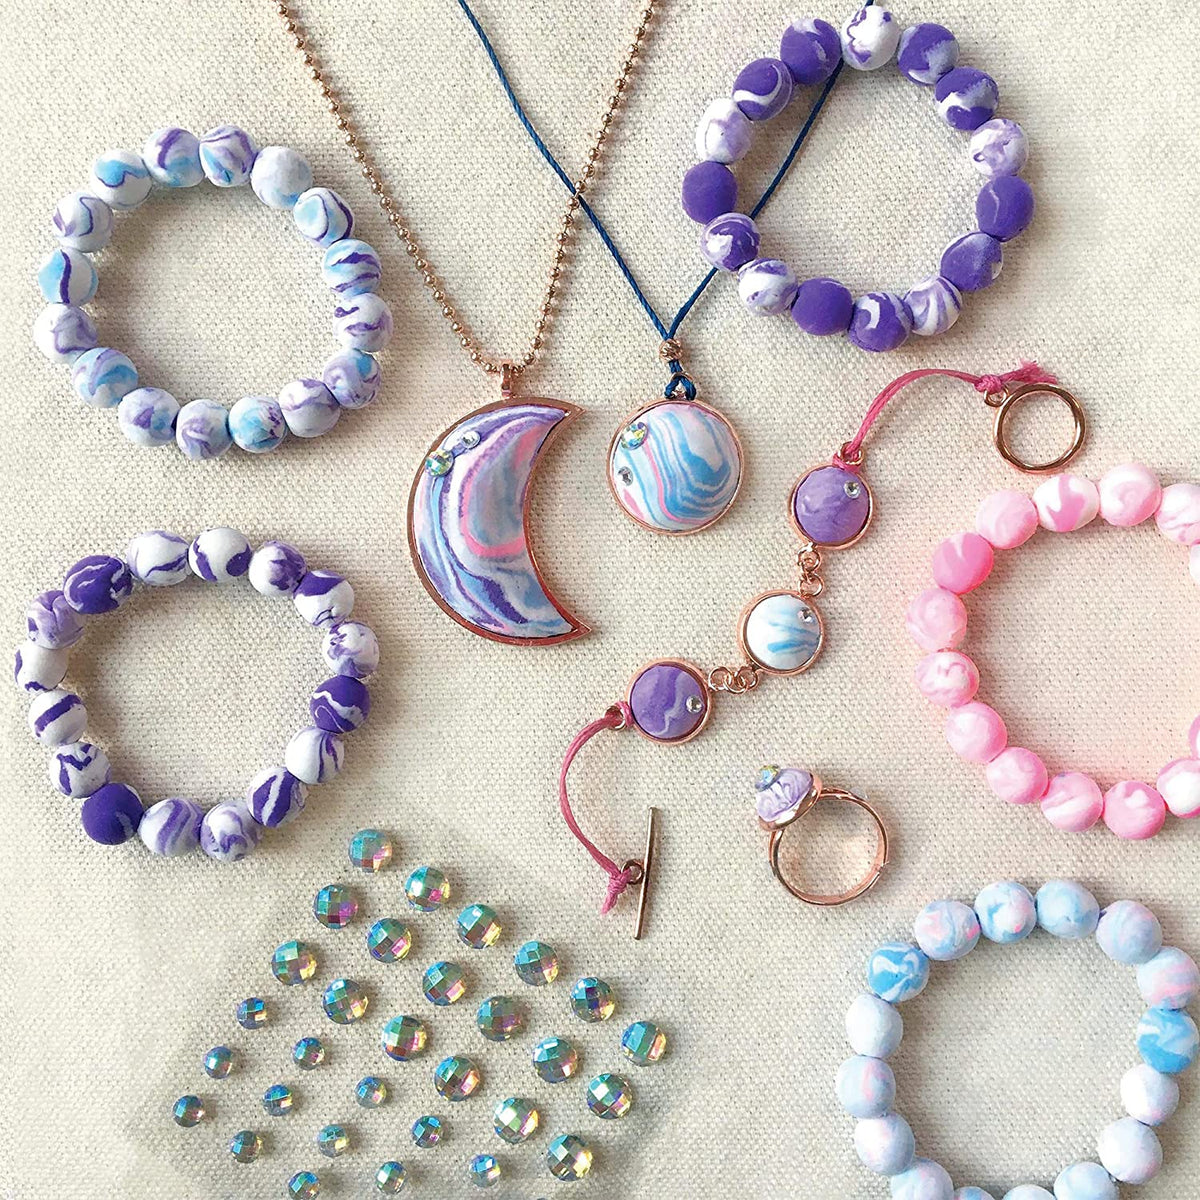 Marbled Moon Jewelry Kit